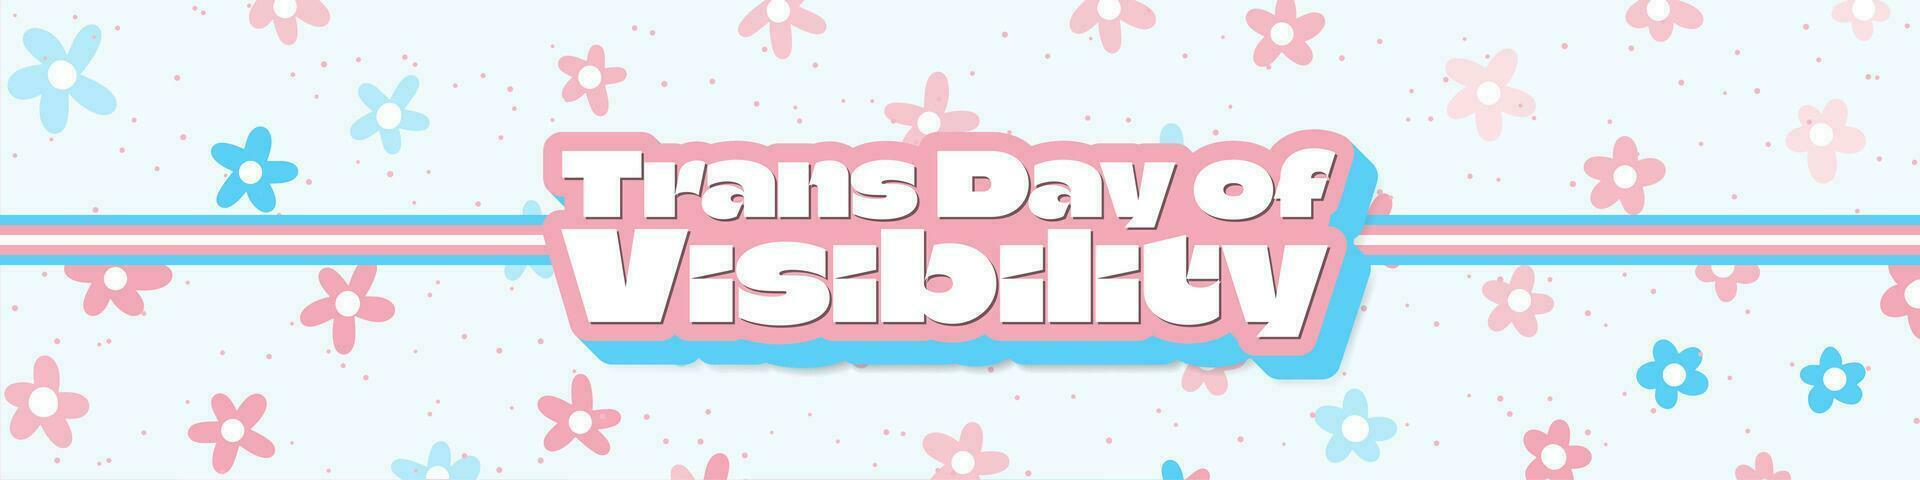 Trans Day of Visibility Typographic Lettering on floral background in Transgender pride flag colors. Celebrated on March 31. Vector Illustration. EPS 10.